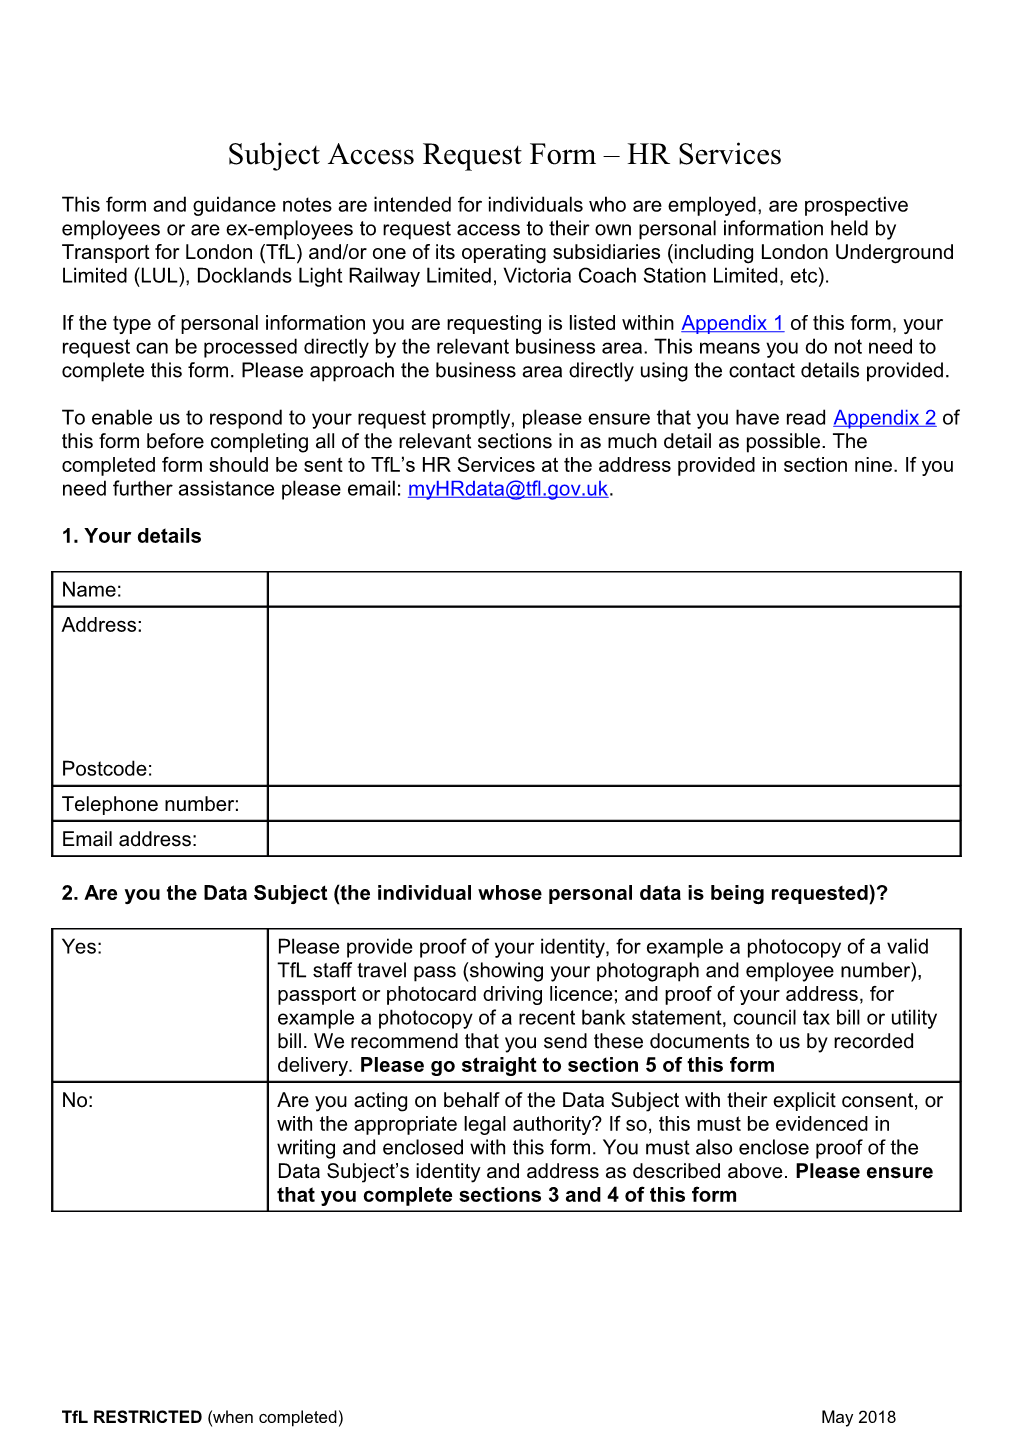 HR Subject Access Request Form